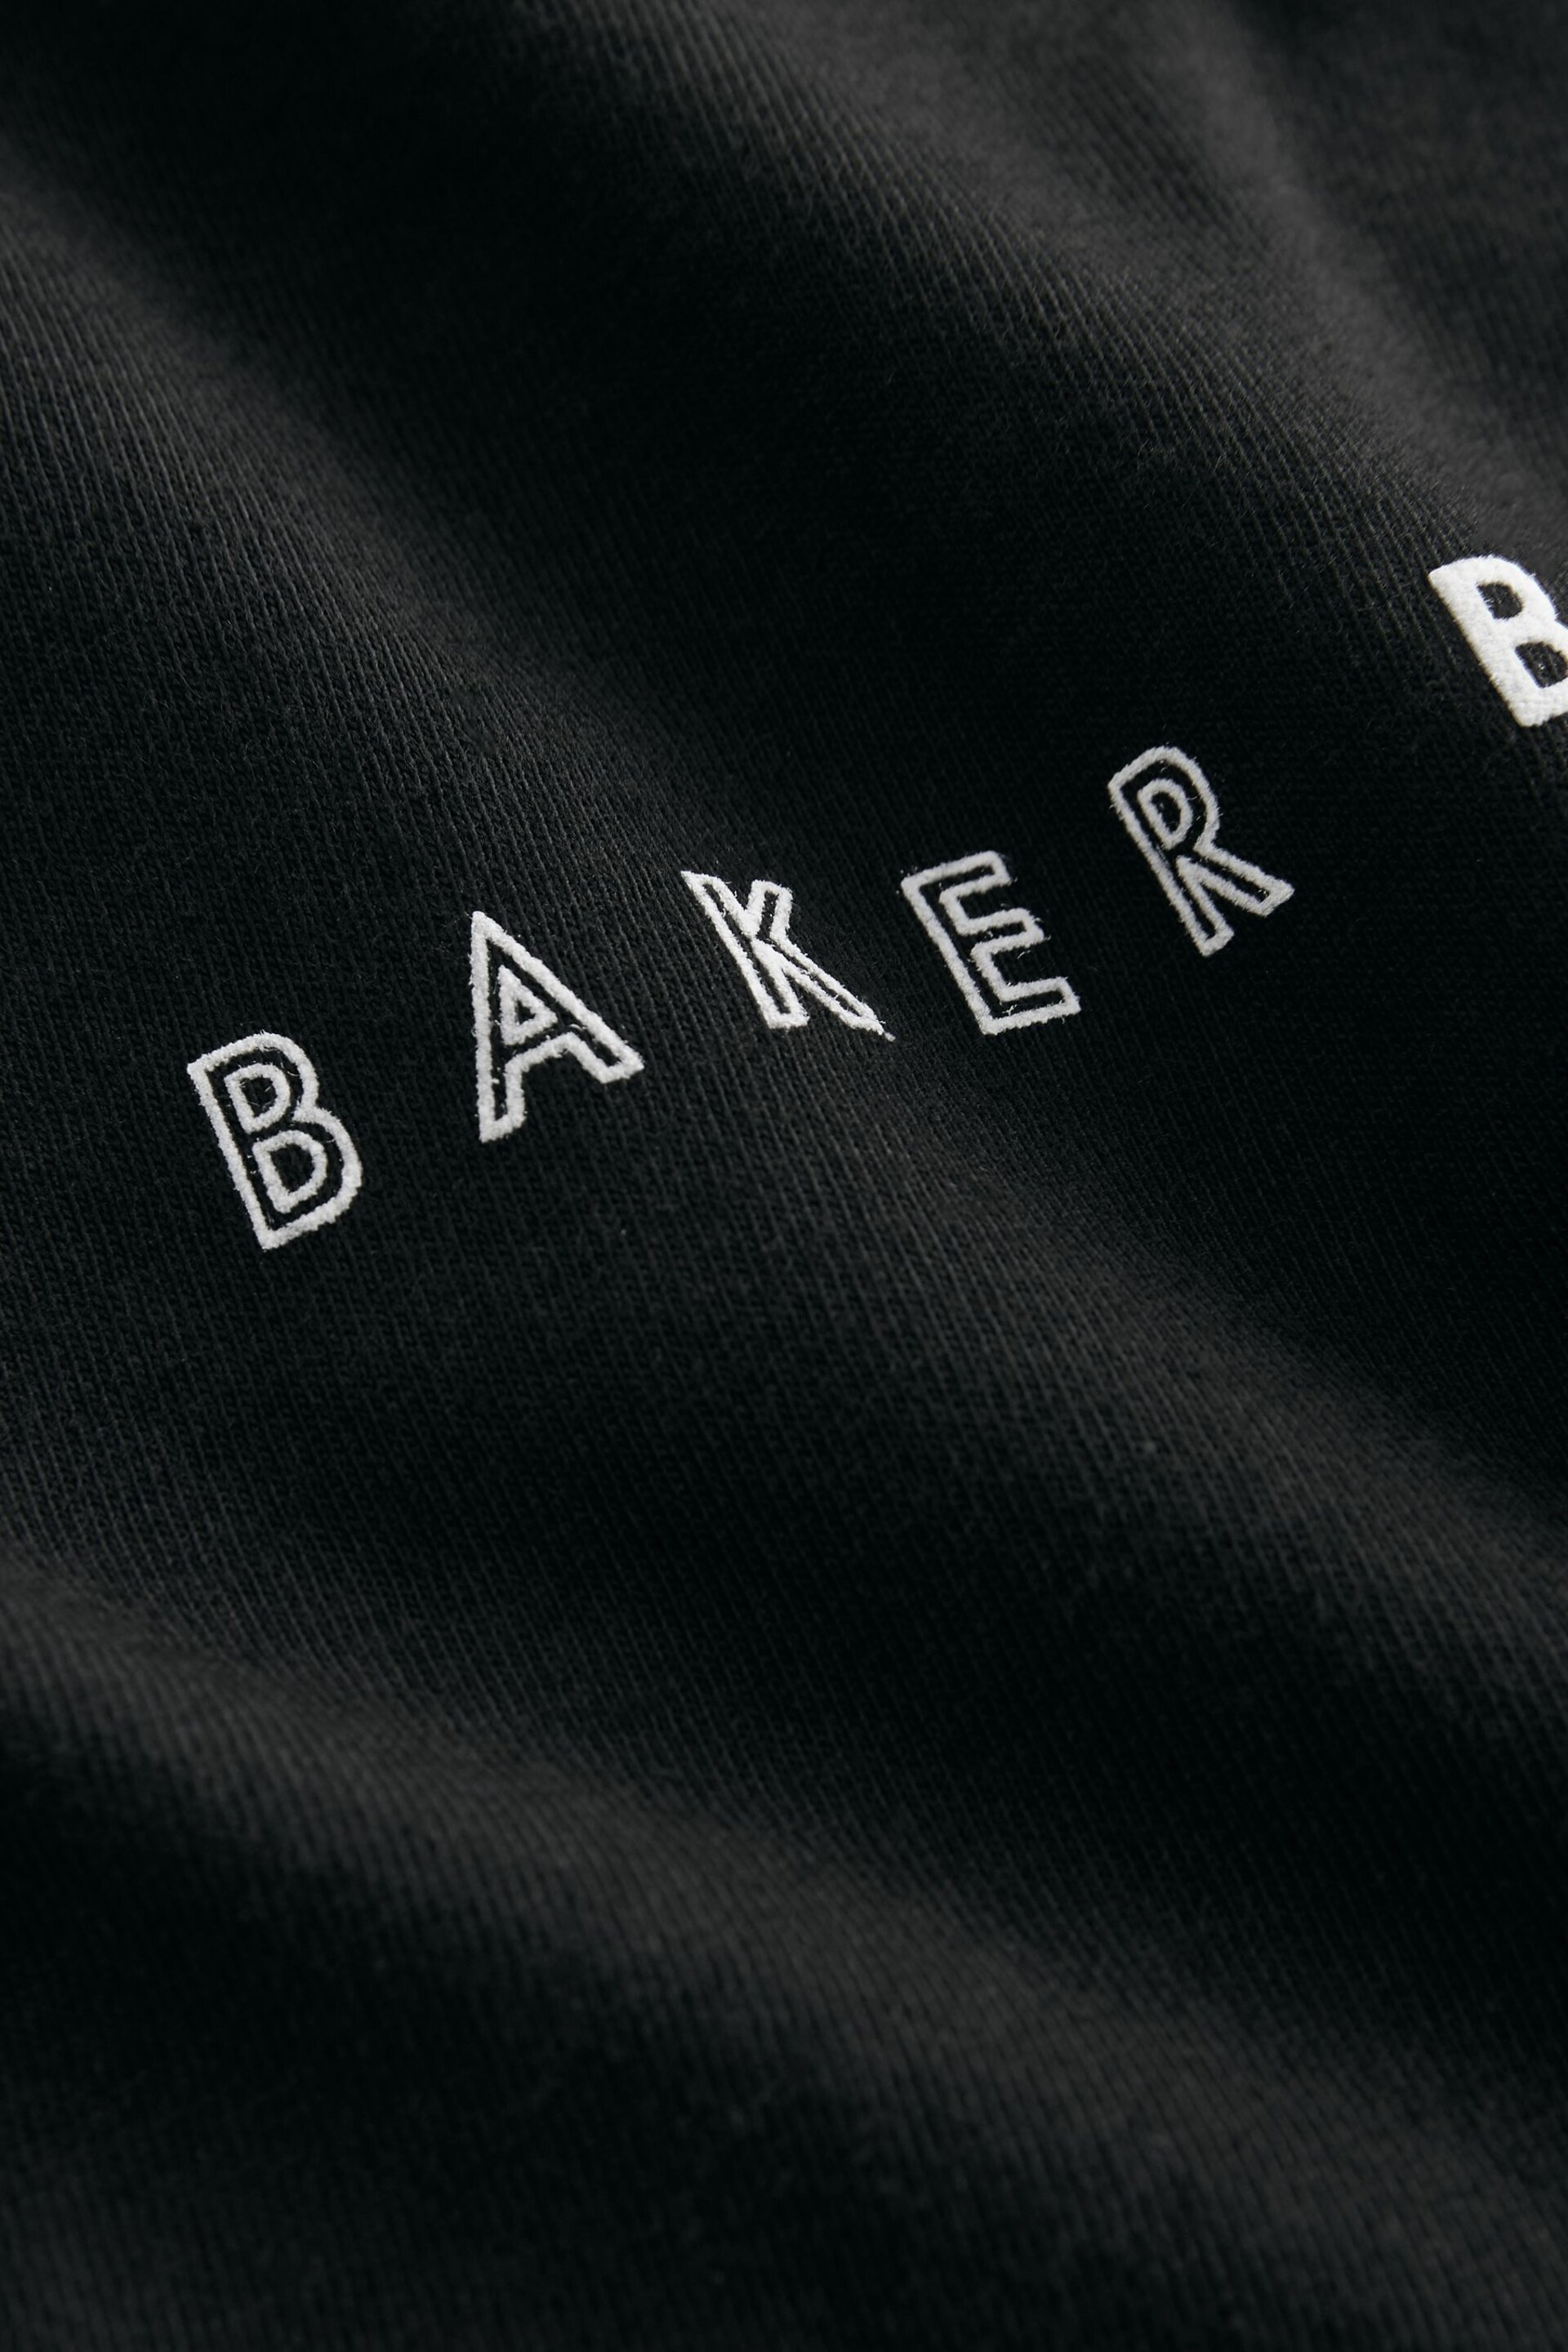 Baker by Ted Baker Graphic T-Shirts 3 Pack - Image 7 of 8